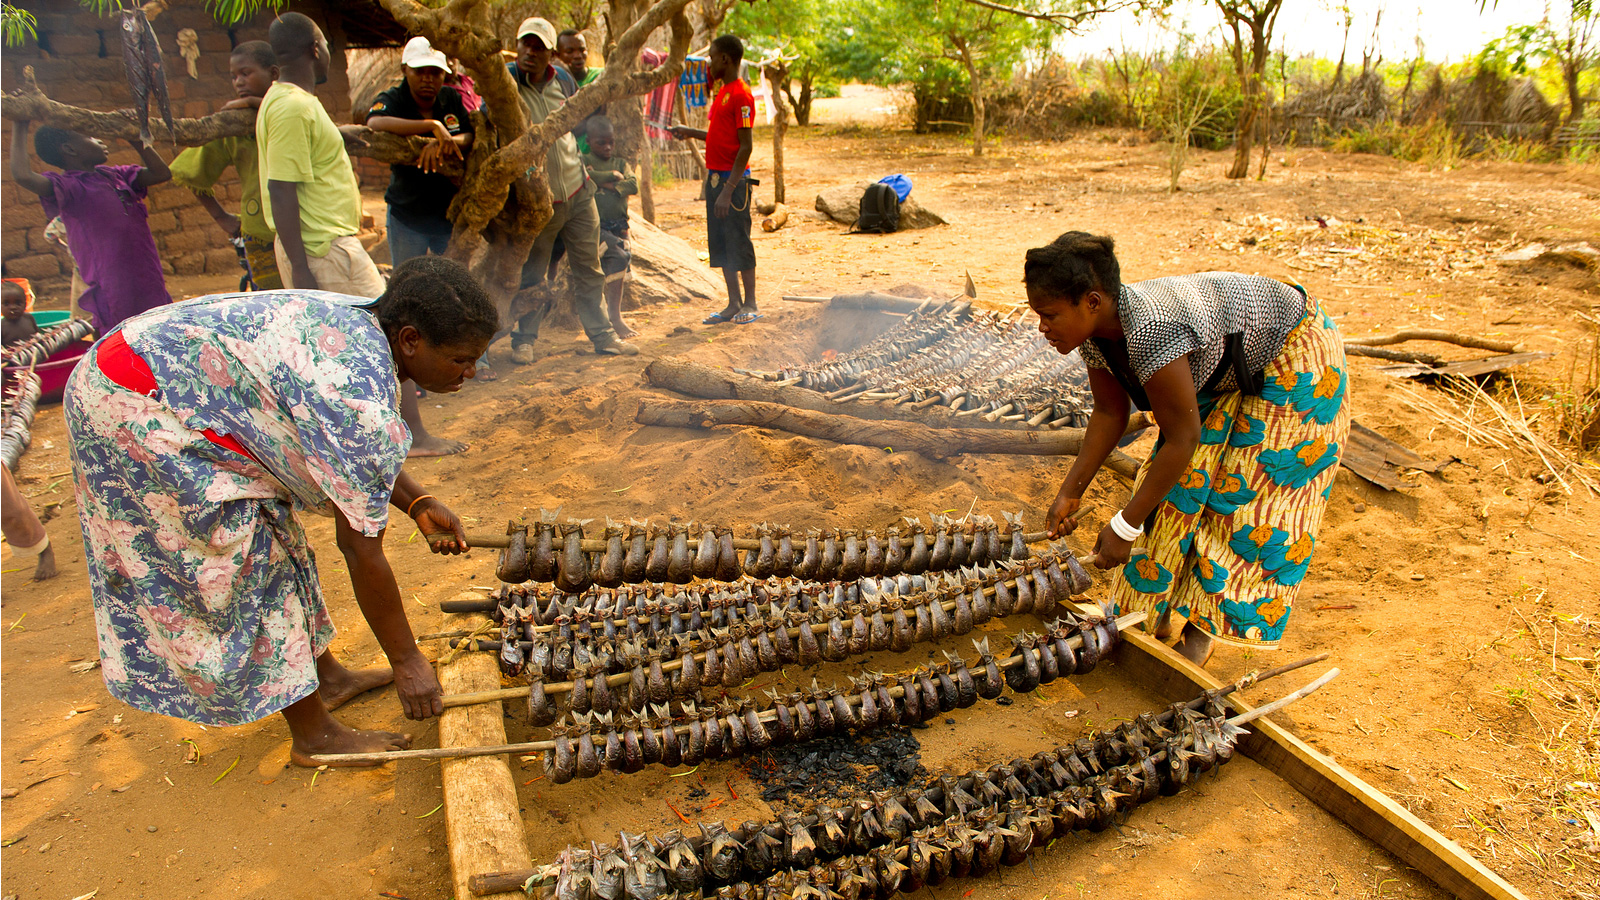 Village women smoke fish they've purchased from local fisherman and then resell the fish at local markets in the village of Katumbi on Lake Tanganyika in Tanzania. Photo © Ami Vitale